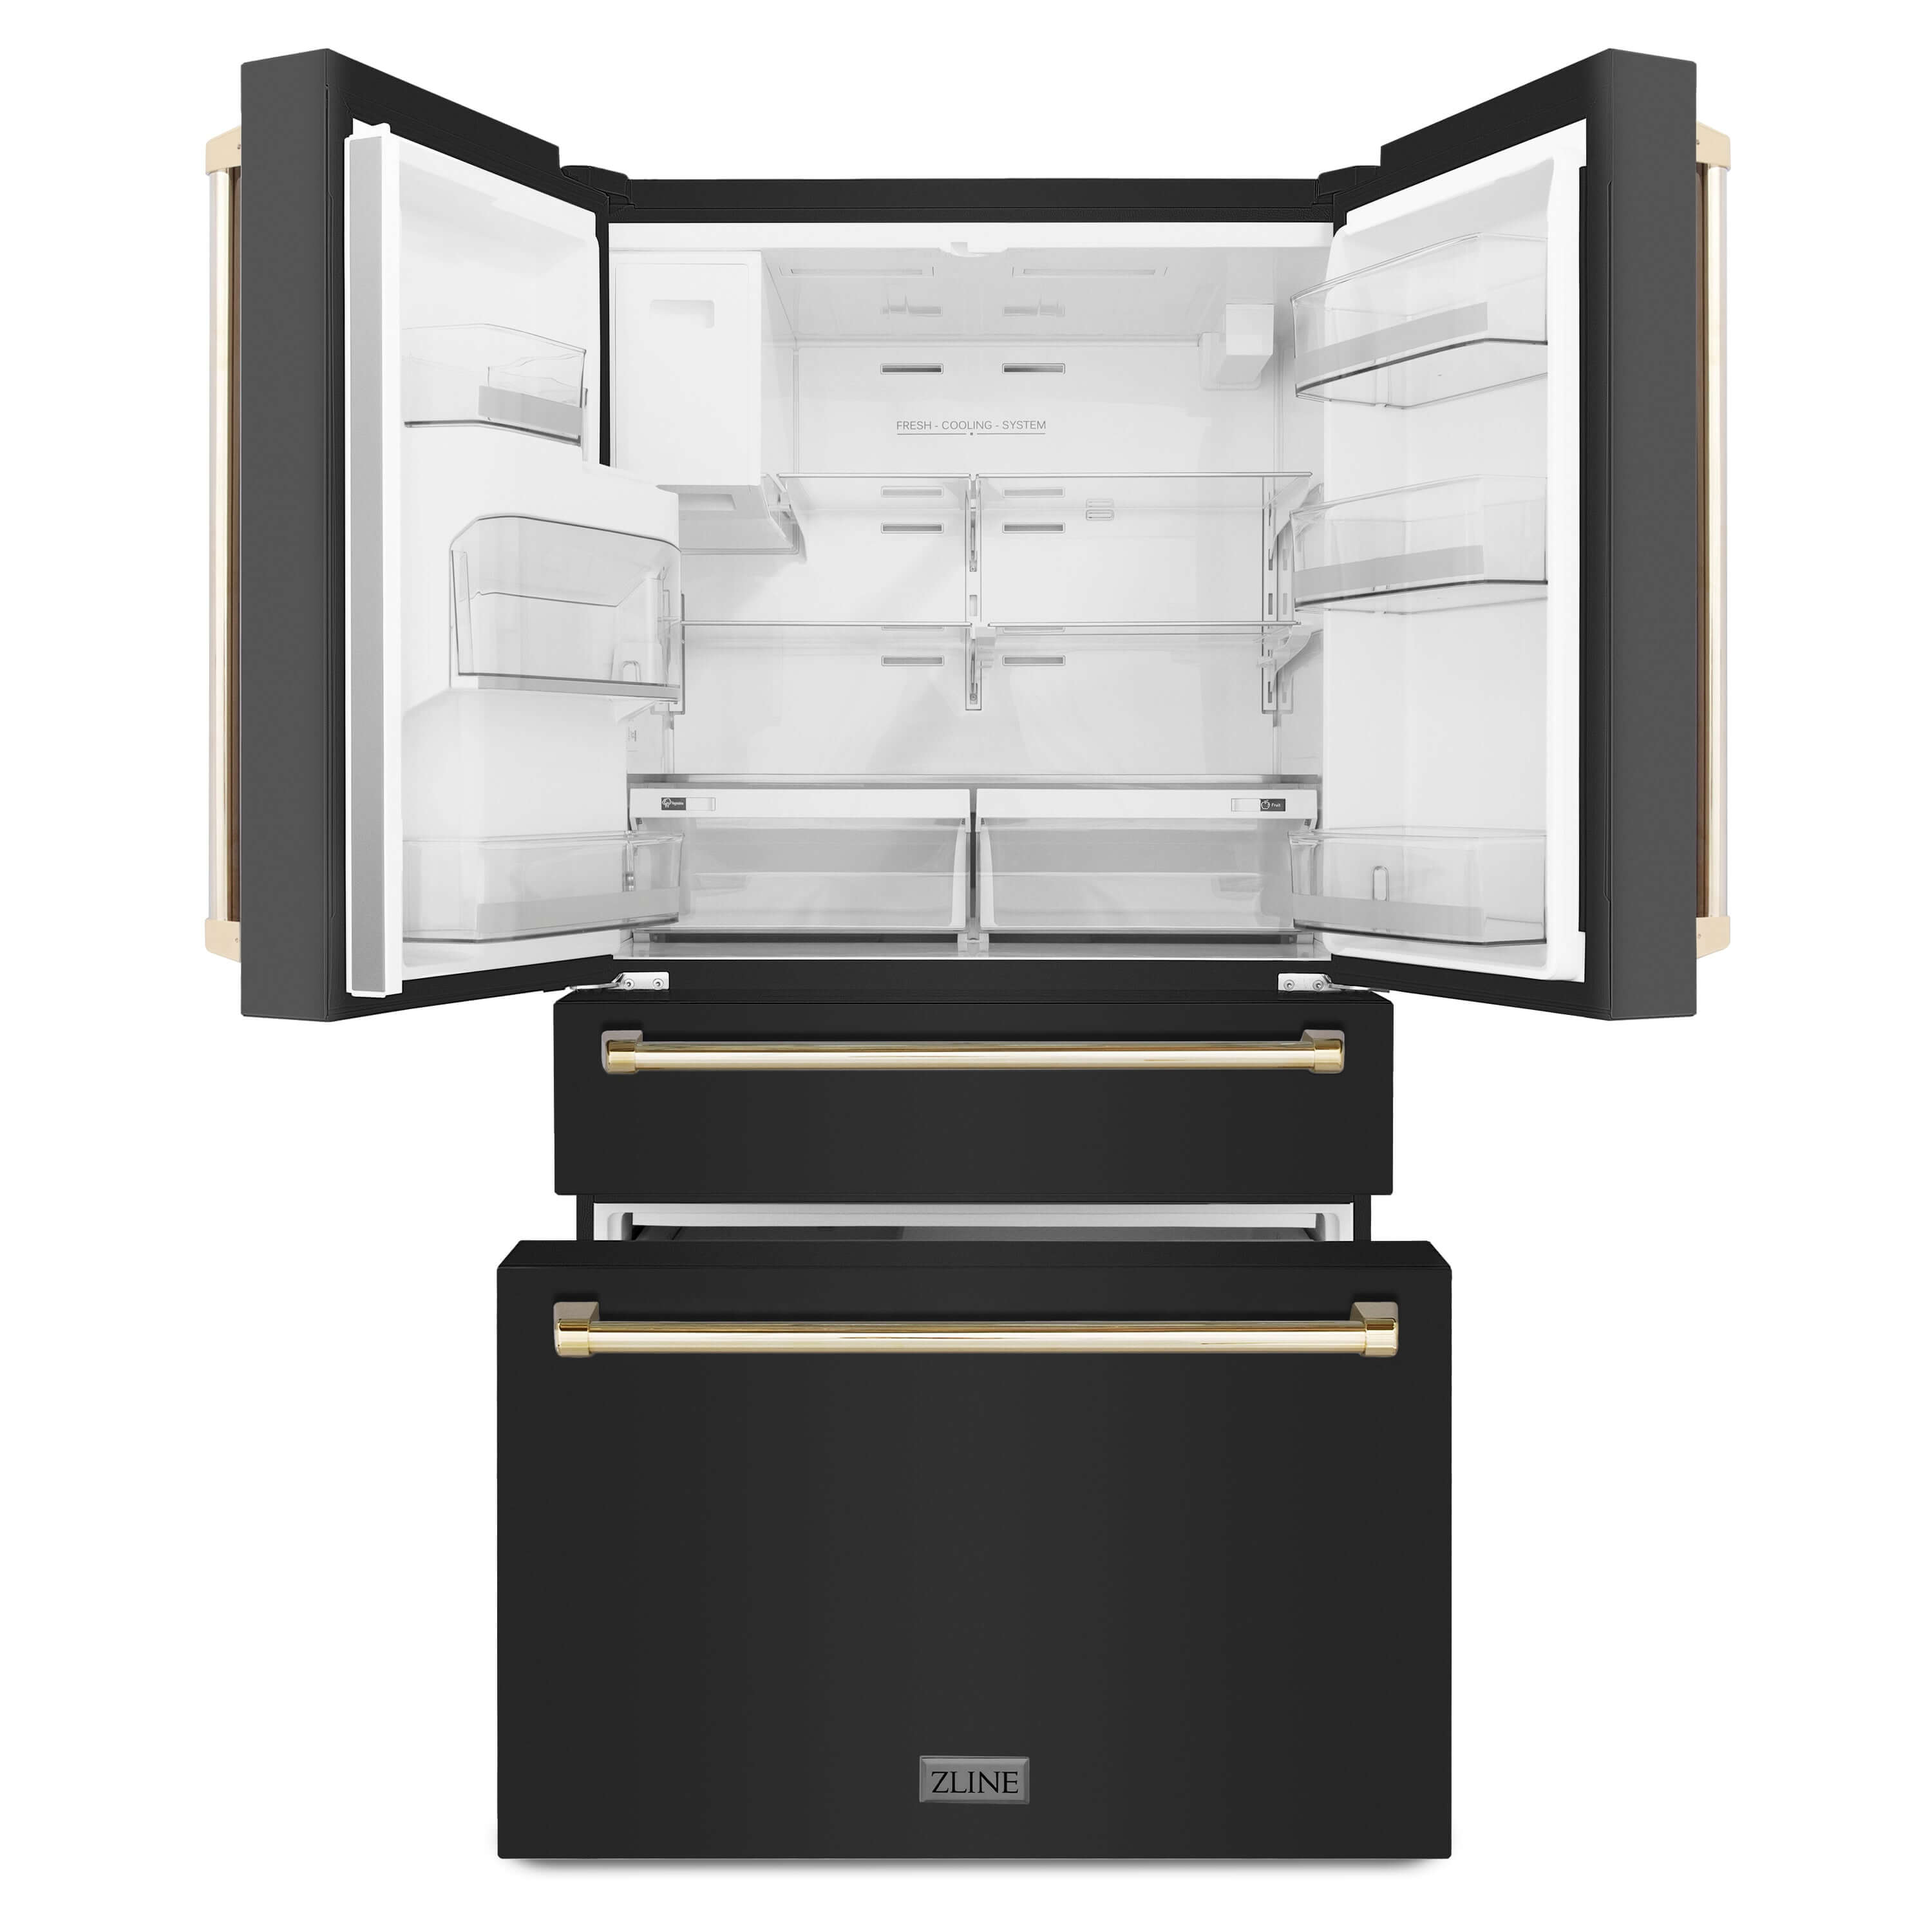 ZLINE 36 in. Autograph Edition 21.6 cu. ft Freestanding French Door Refrigerator with Water and Ice Dispenser in Fingerprint Resistant Black Stainless Steel with Polished Gold Accents (RFMZ-W-36-BS-G)